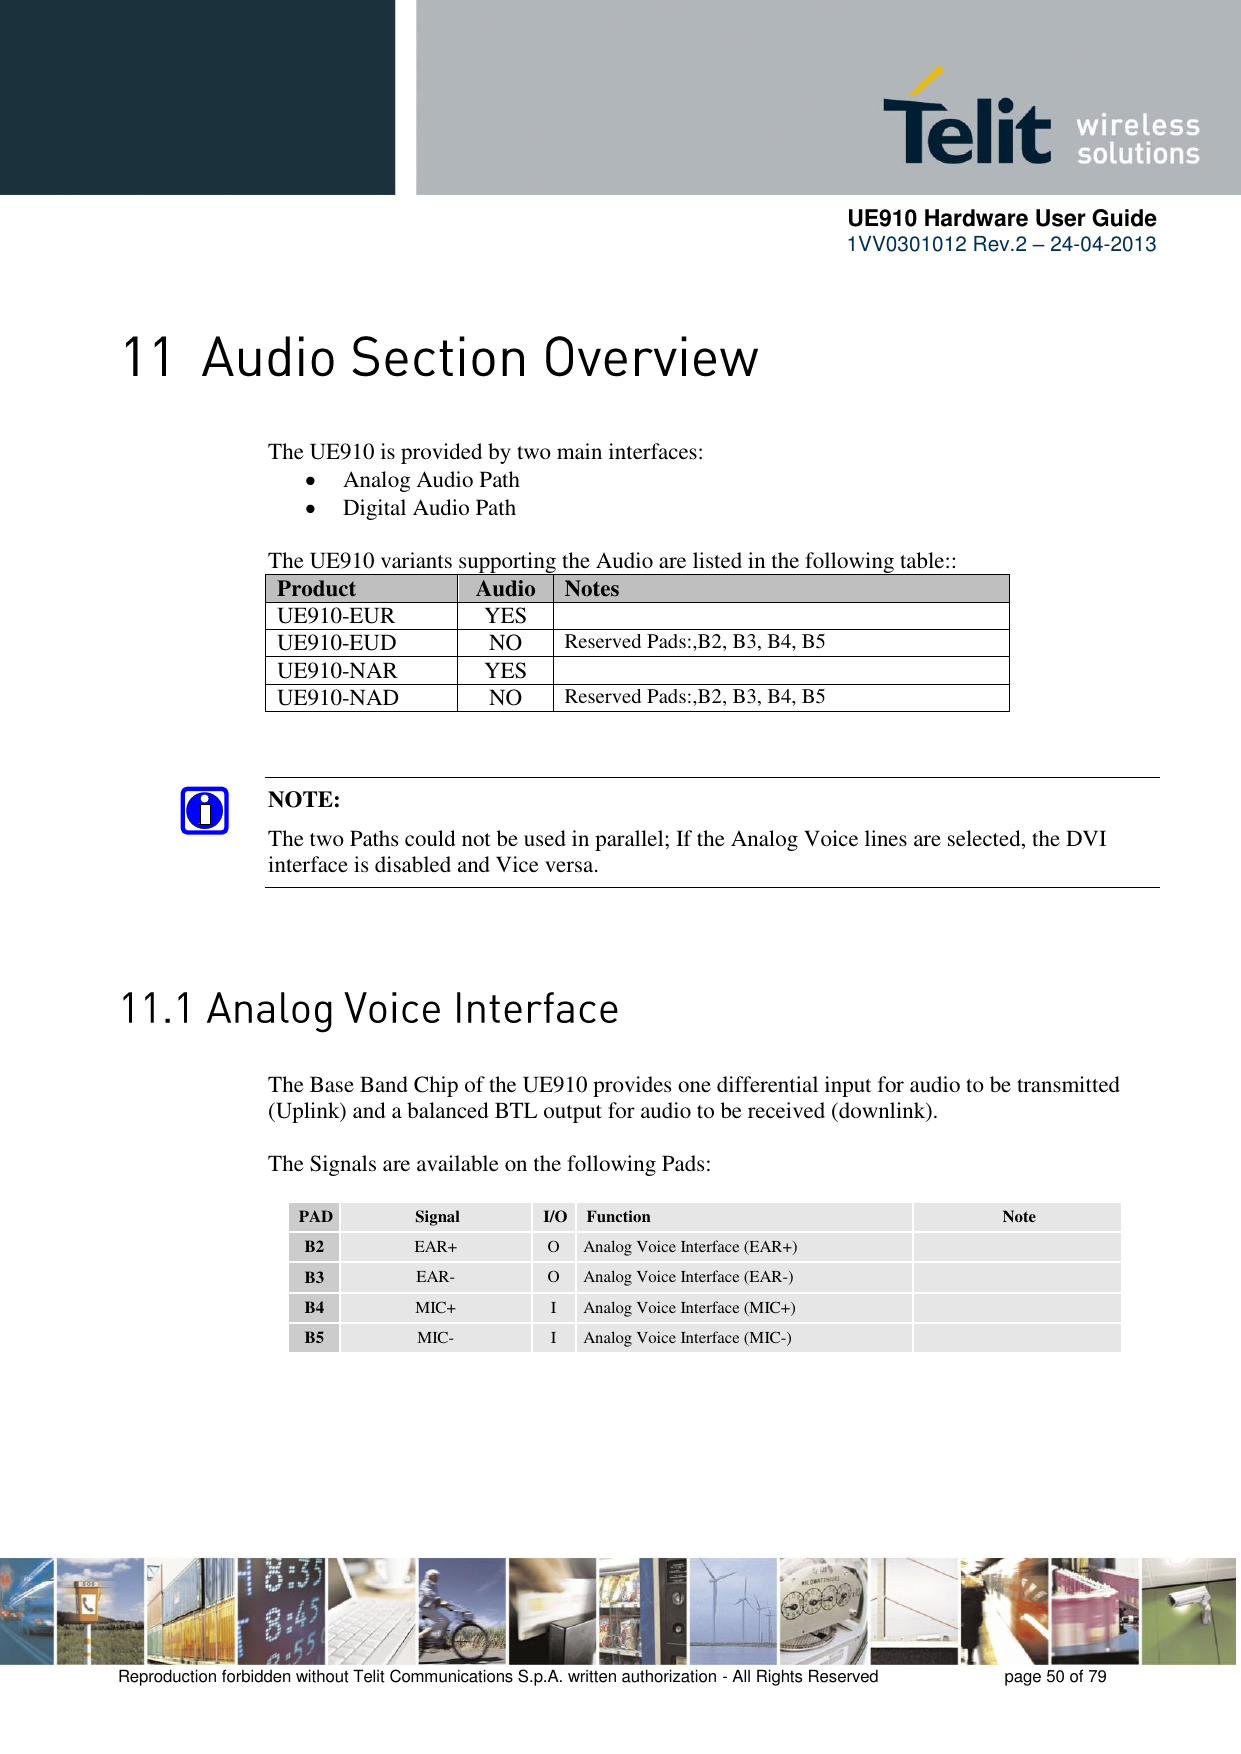      UE910 Hardware User Guide  1VV0301012 Rev.2 – 24-04-2013    Reproduction forbidden without Telit Communications S.p.A. written authorization - All Rights Reserved    page 50 of 79   The UE910 is provided by two main interfaces:   Analog Audio Path   Digital Audio Path  The UE910 variants supporting the Audio are listed in the following table::  Product Audio Notes UE910-EUR YES  UE910-EUD NO Reserved Pads:,B2, B3, B4, B5 UE910-NAR YES  UE910-NAD NO Reserved Pads:,B2, B3, B4, B5   NOTE: The two Paths could not be used in parallel; If the Analog Voice lines are selected, the DVI interface is disabled and Vice versa.   The Base Band Chip of the UE910 provides one differential input for audio to be transmitted (Uplink) and a balanced BTL output for audio to be received (downlink).  The Signals are available on the following Pads:  PAD Signal I/O Function Note B2 EAR+ O Analog Voice Interface (EAR+)  B3 EAR- O Analog Voice Interface (EAR-)  B4 MIC+ I Analog Voice Interface (MIC+)  B5 MIC- I Analog Voice Interface (MIC-)     